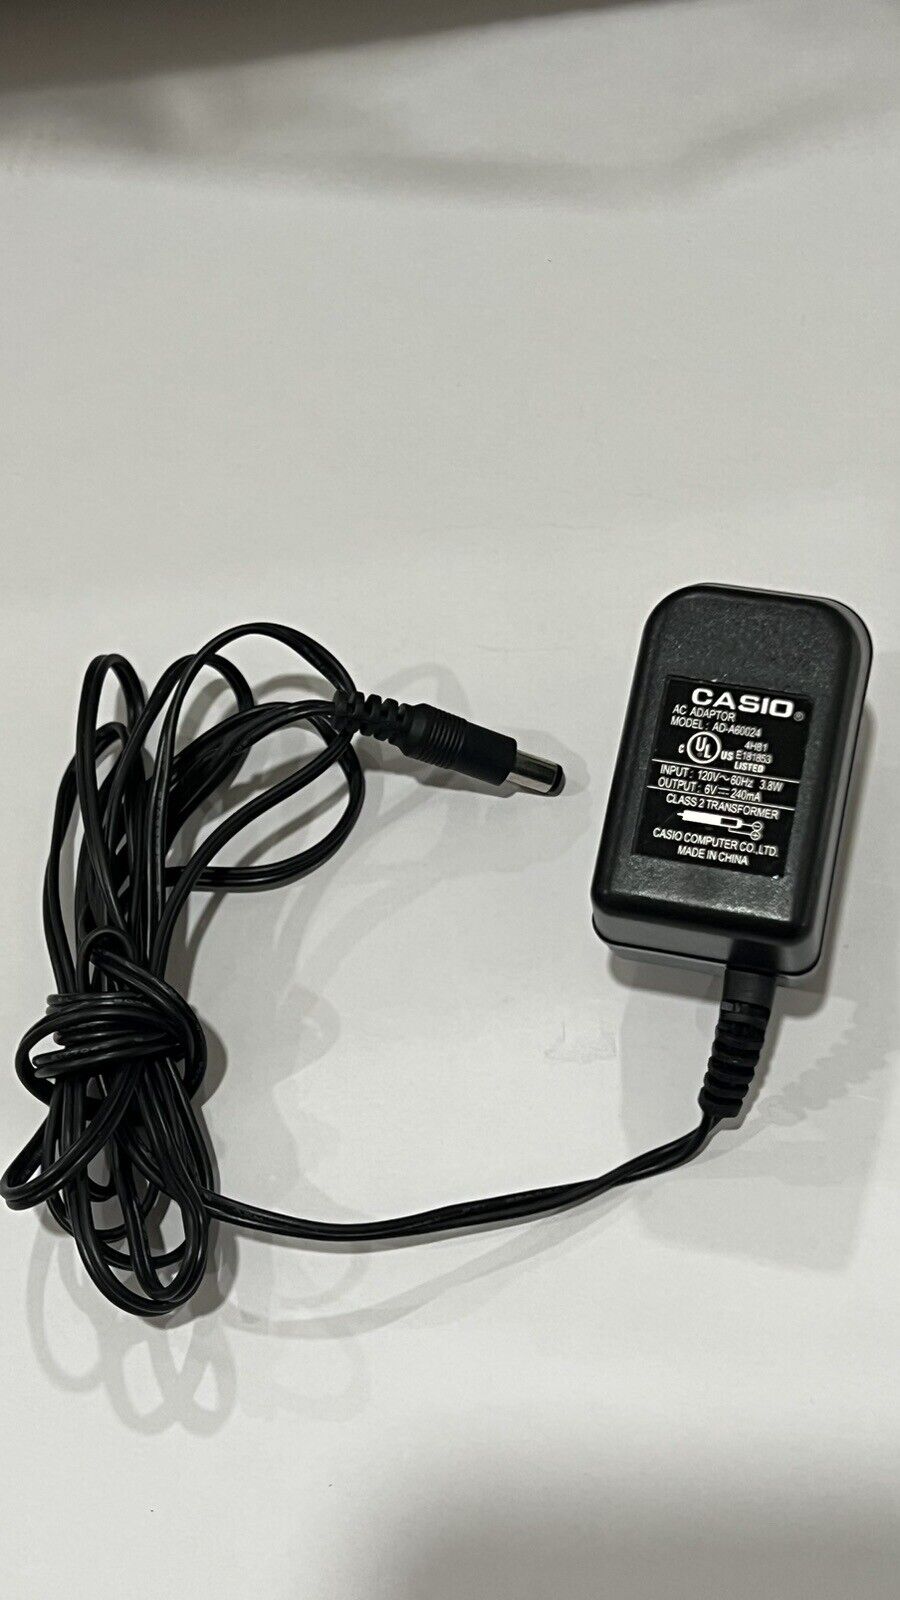 *Brand NEW*Genuine Casio AD-A60024 6V 240mA AC/DC Adapter Calculator Charger Power Supply